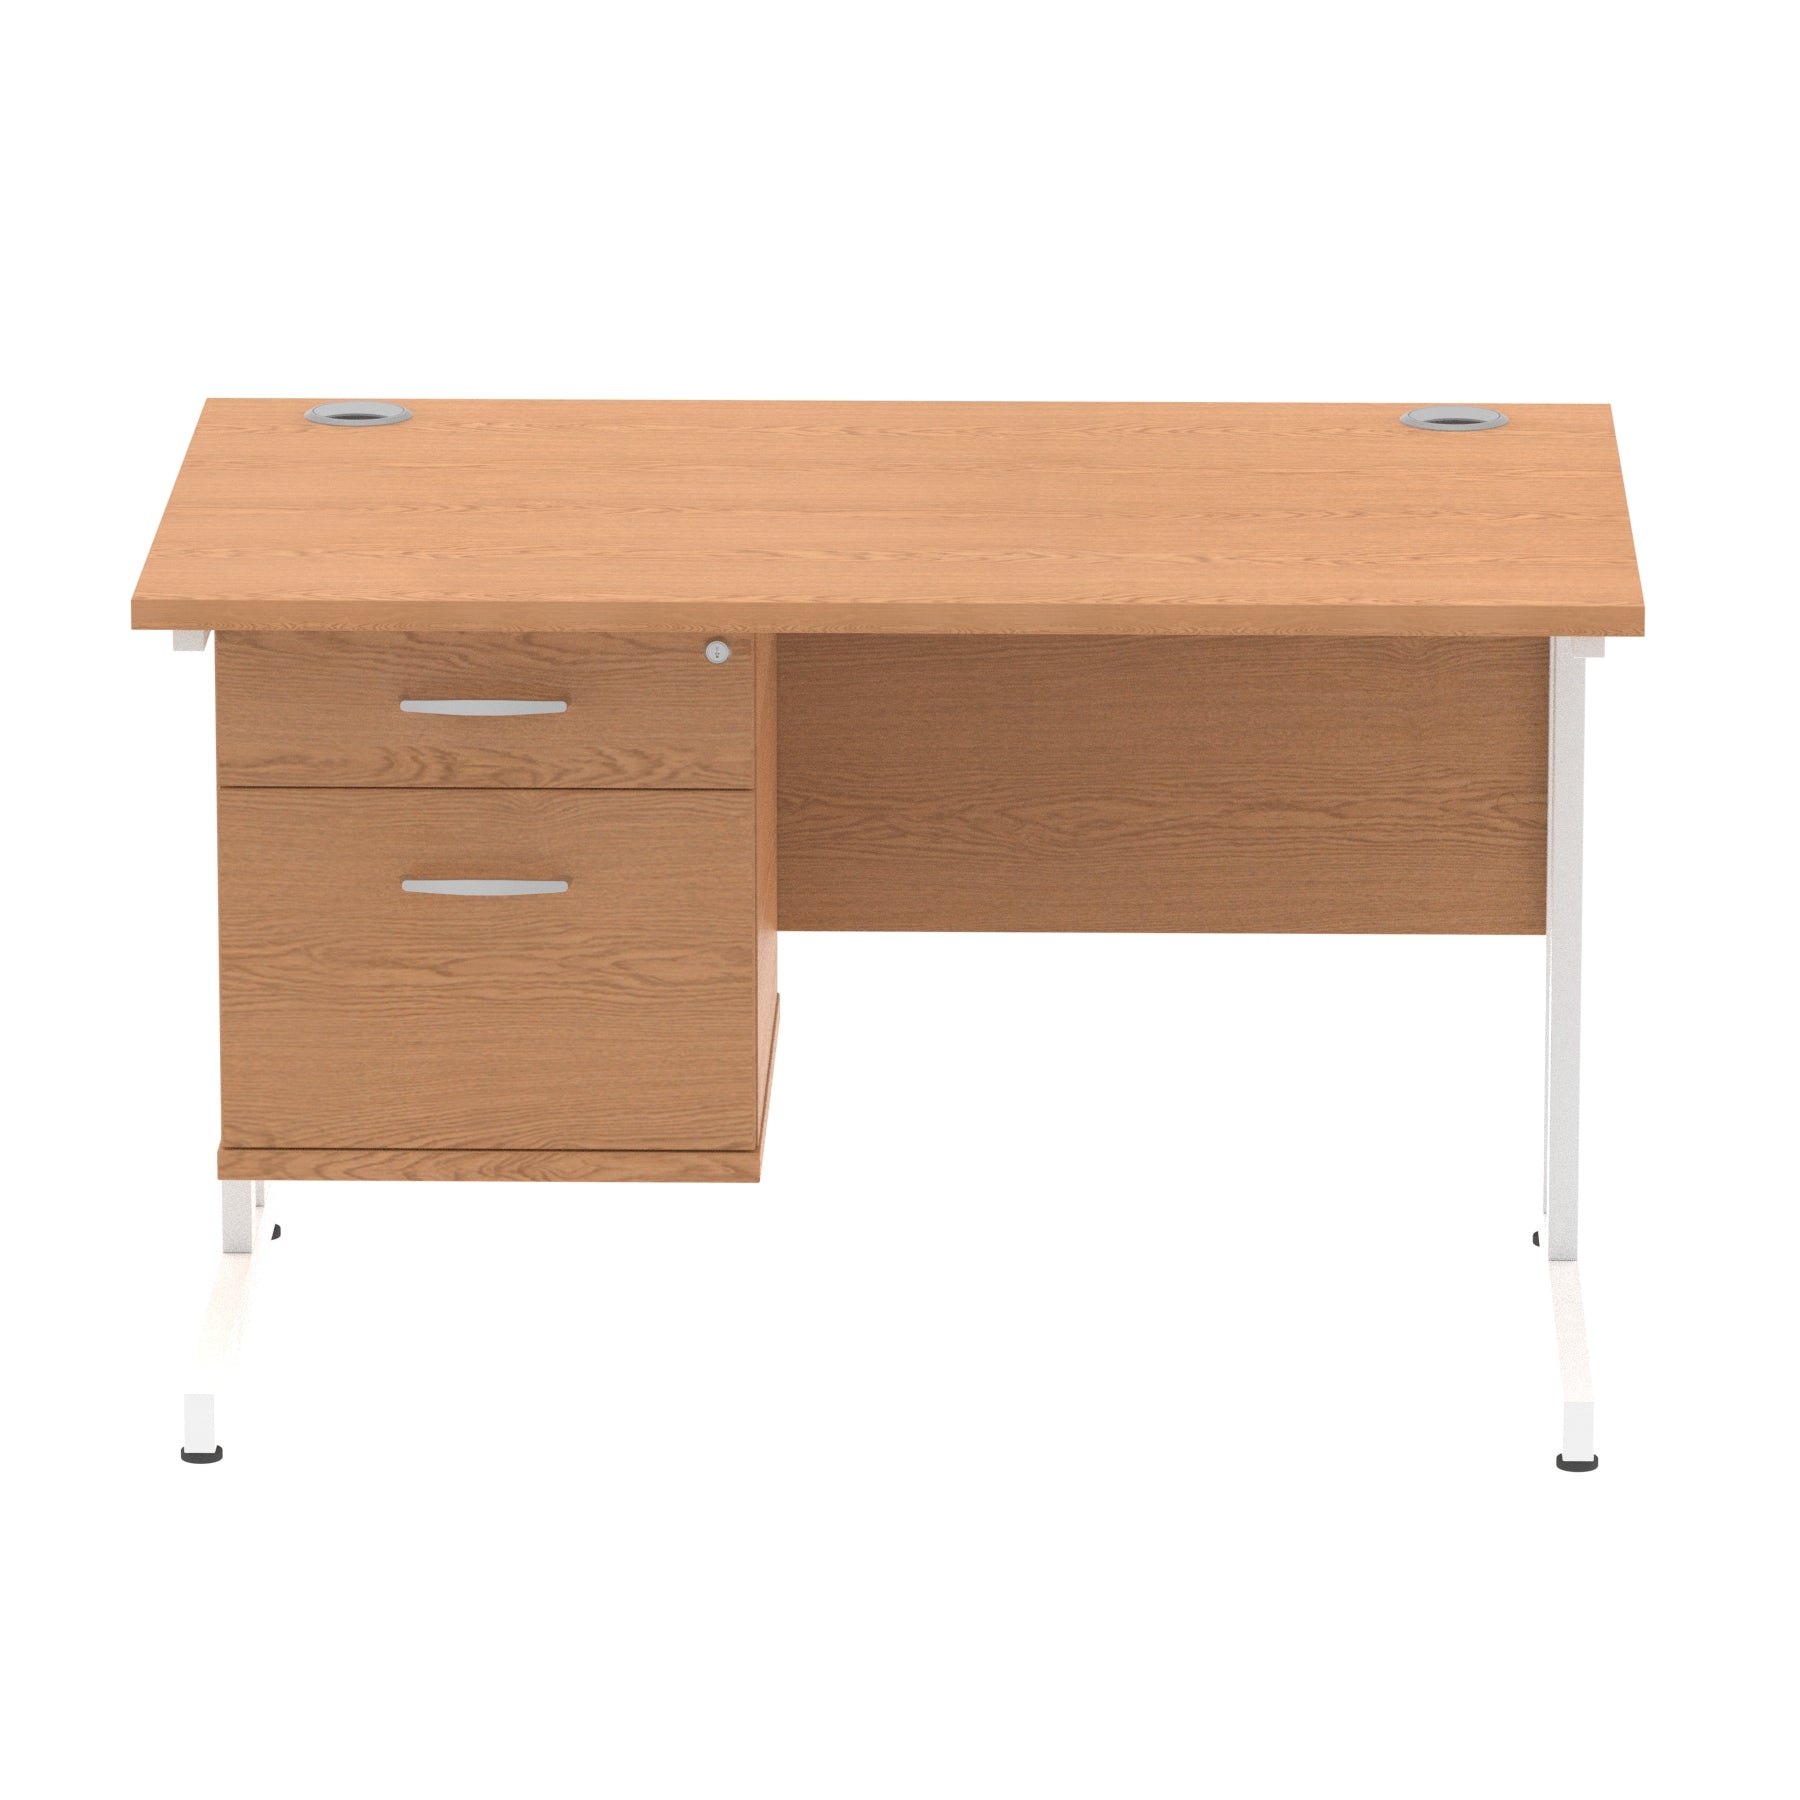 Impulse Cantilever Straight Desk - White Frame, Fixed Pedestal, MFC Material, 1200-1800mm Width, 2-3 Lockable Drawers, 5-Year Guarantee